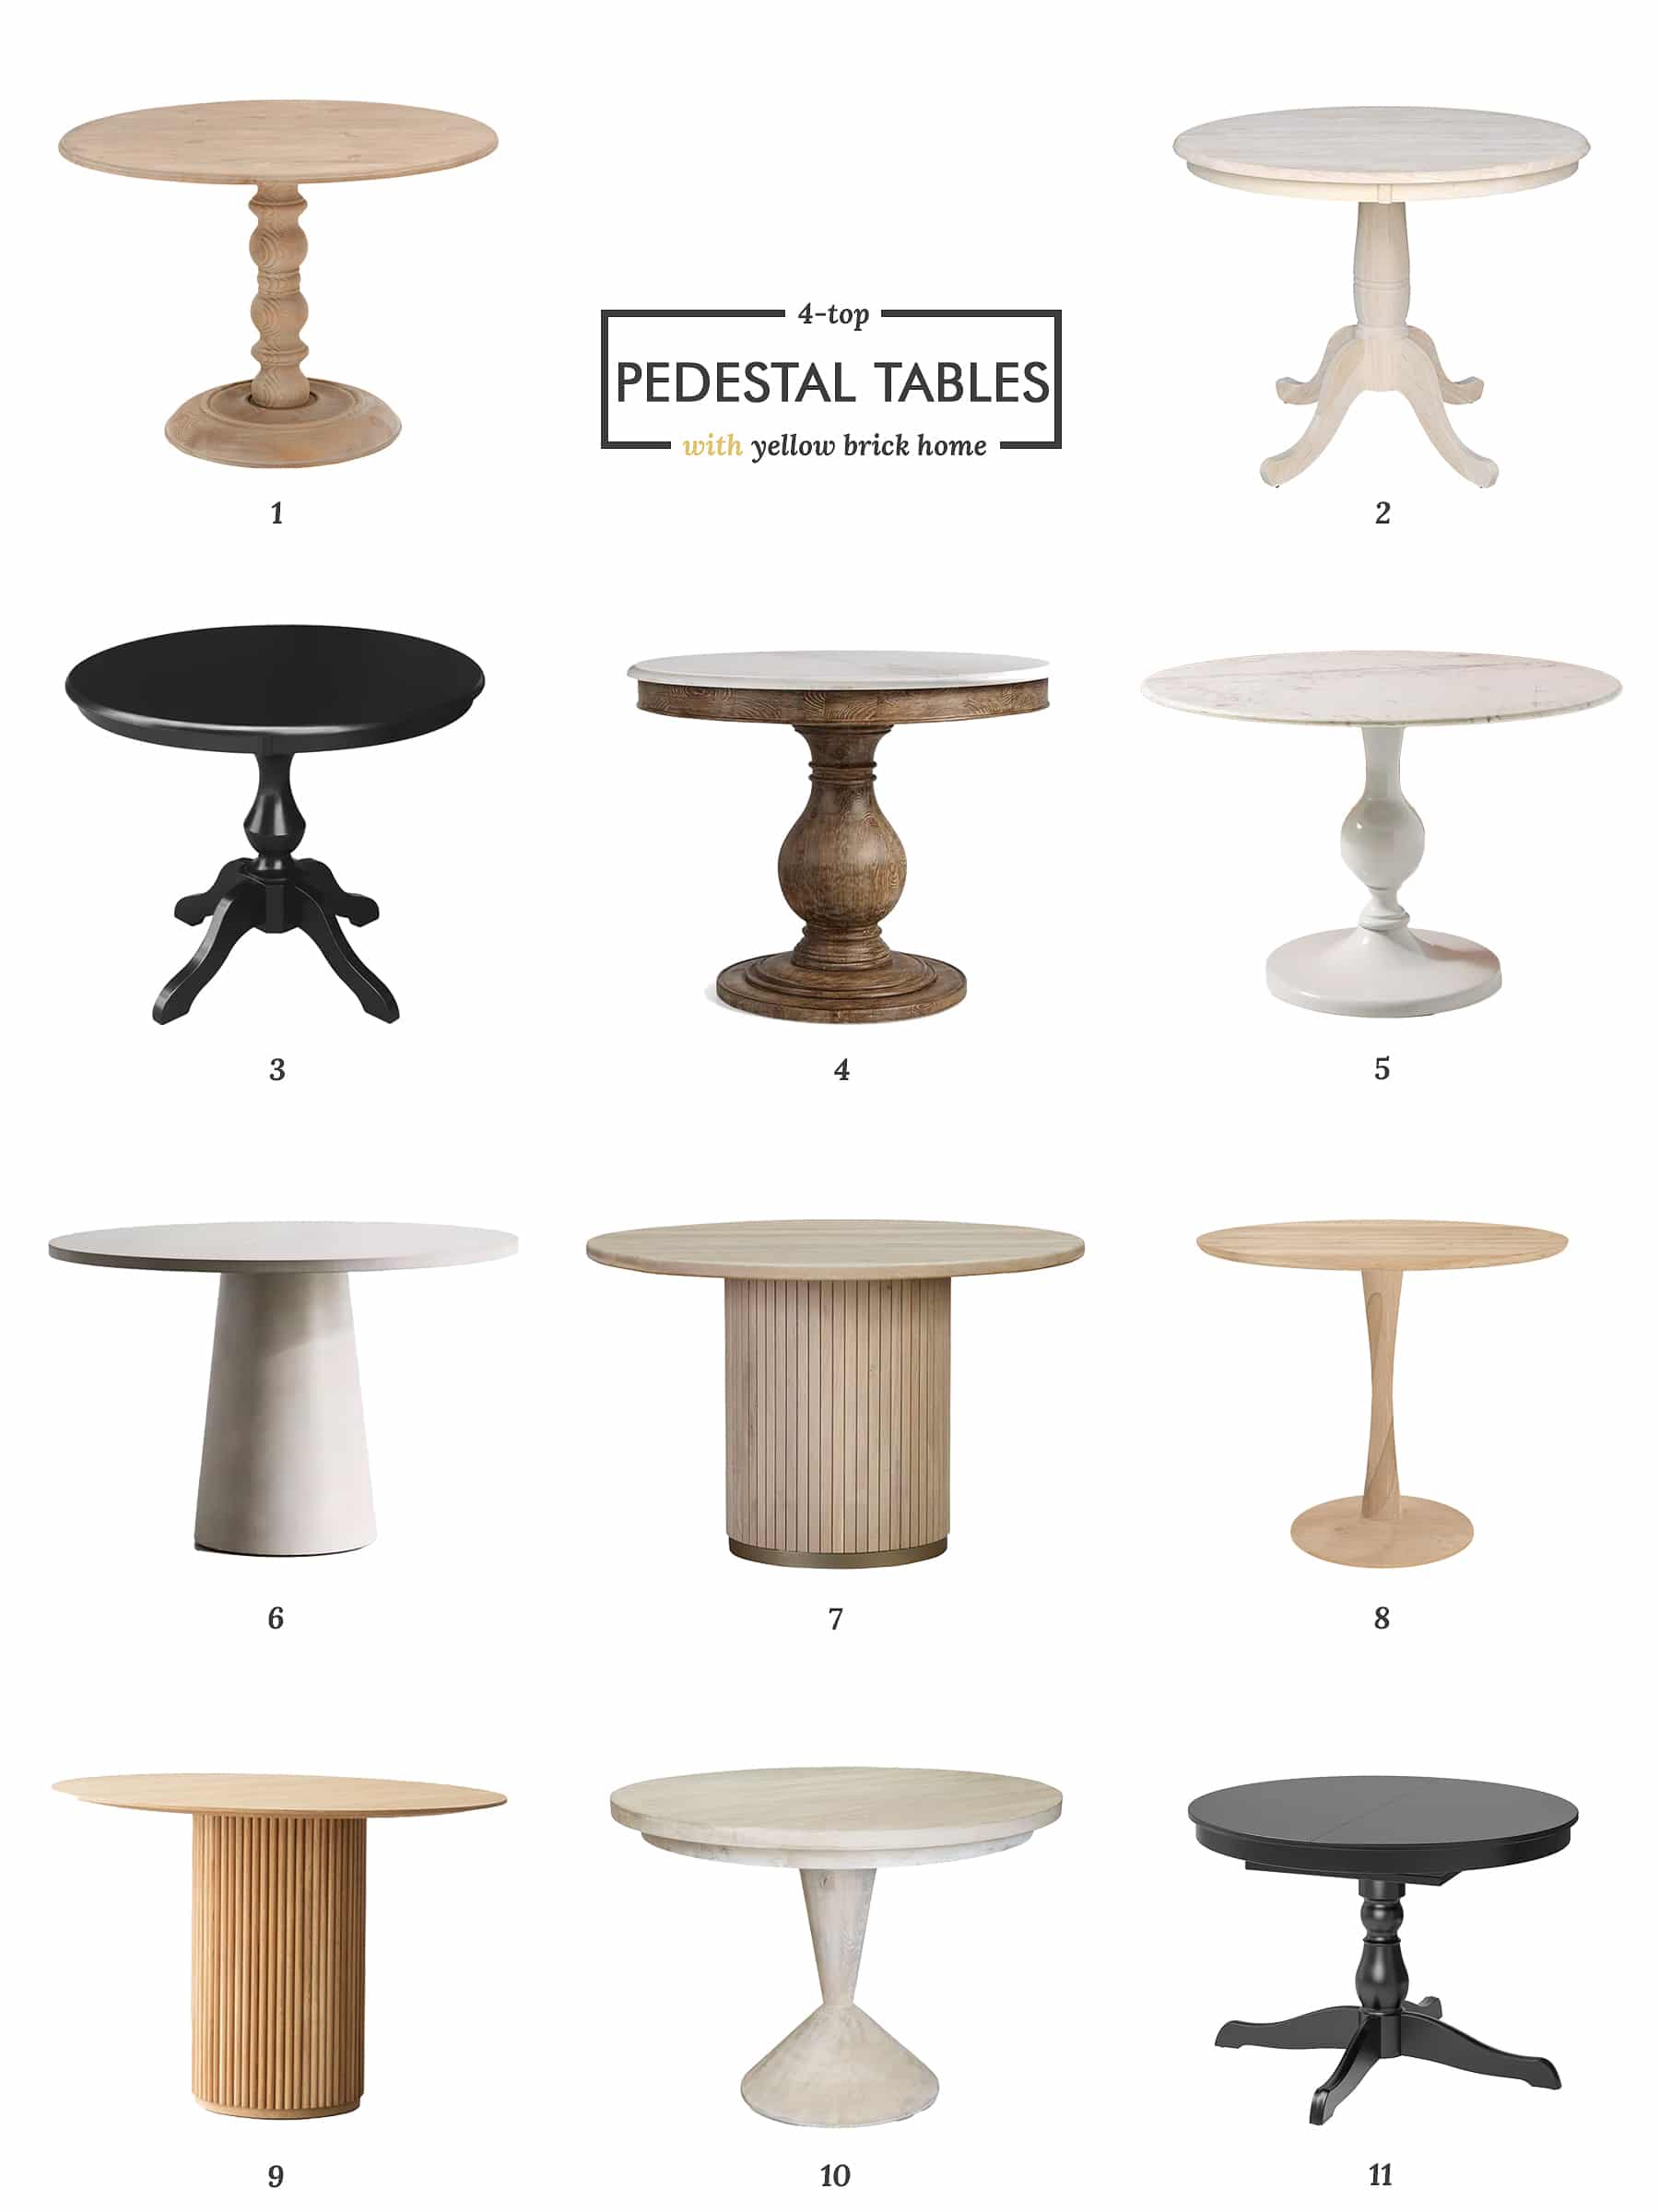 A round-up of 20 4-top pedestal tables we considered for our kitchen renovation | via Yellow Brick Home

pedestal tables, 4-top tables, bistro tables, 4 seater tables, small kitchen table